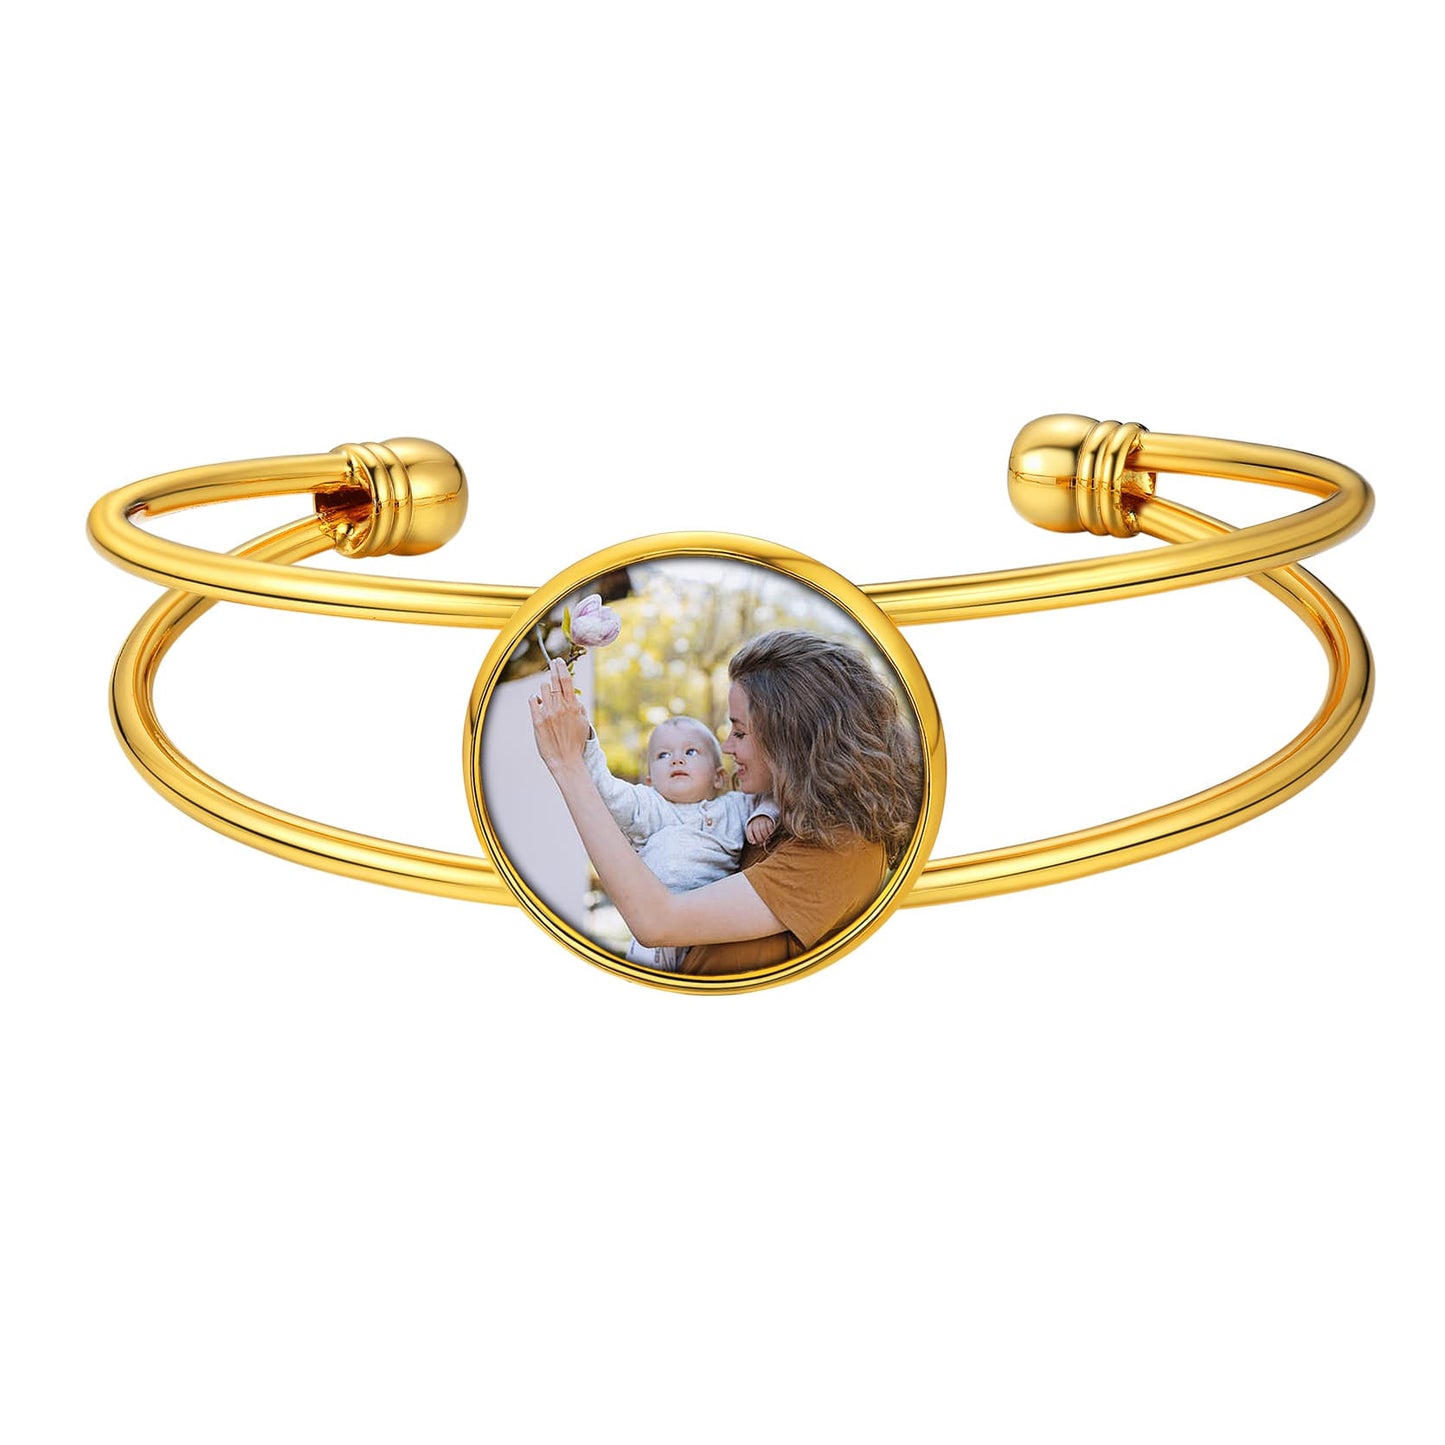 Cuff Bracelet With Photo Gold